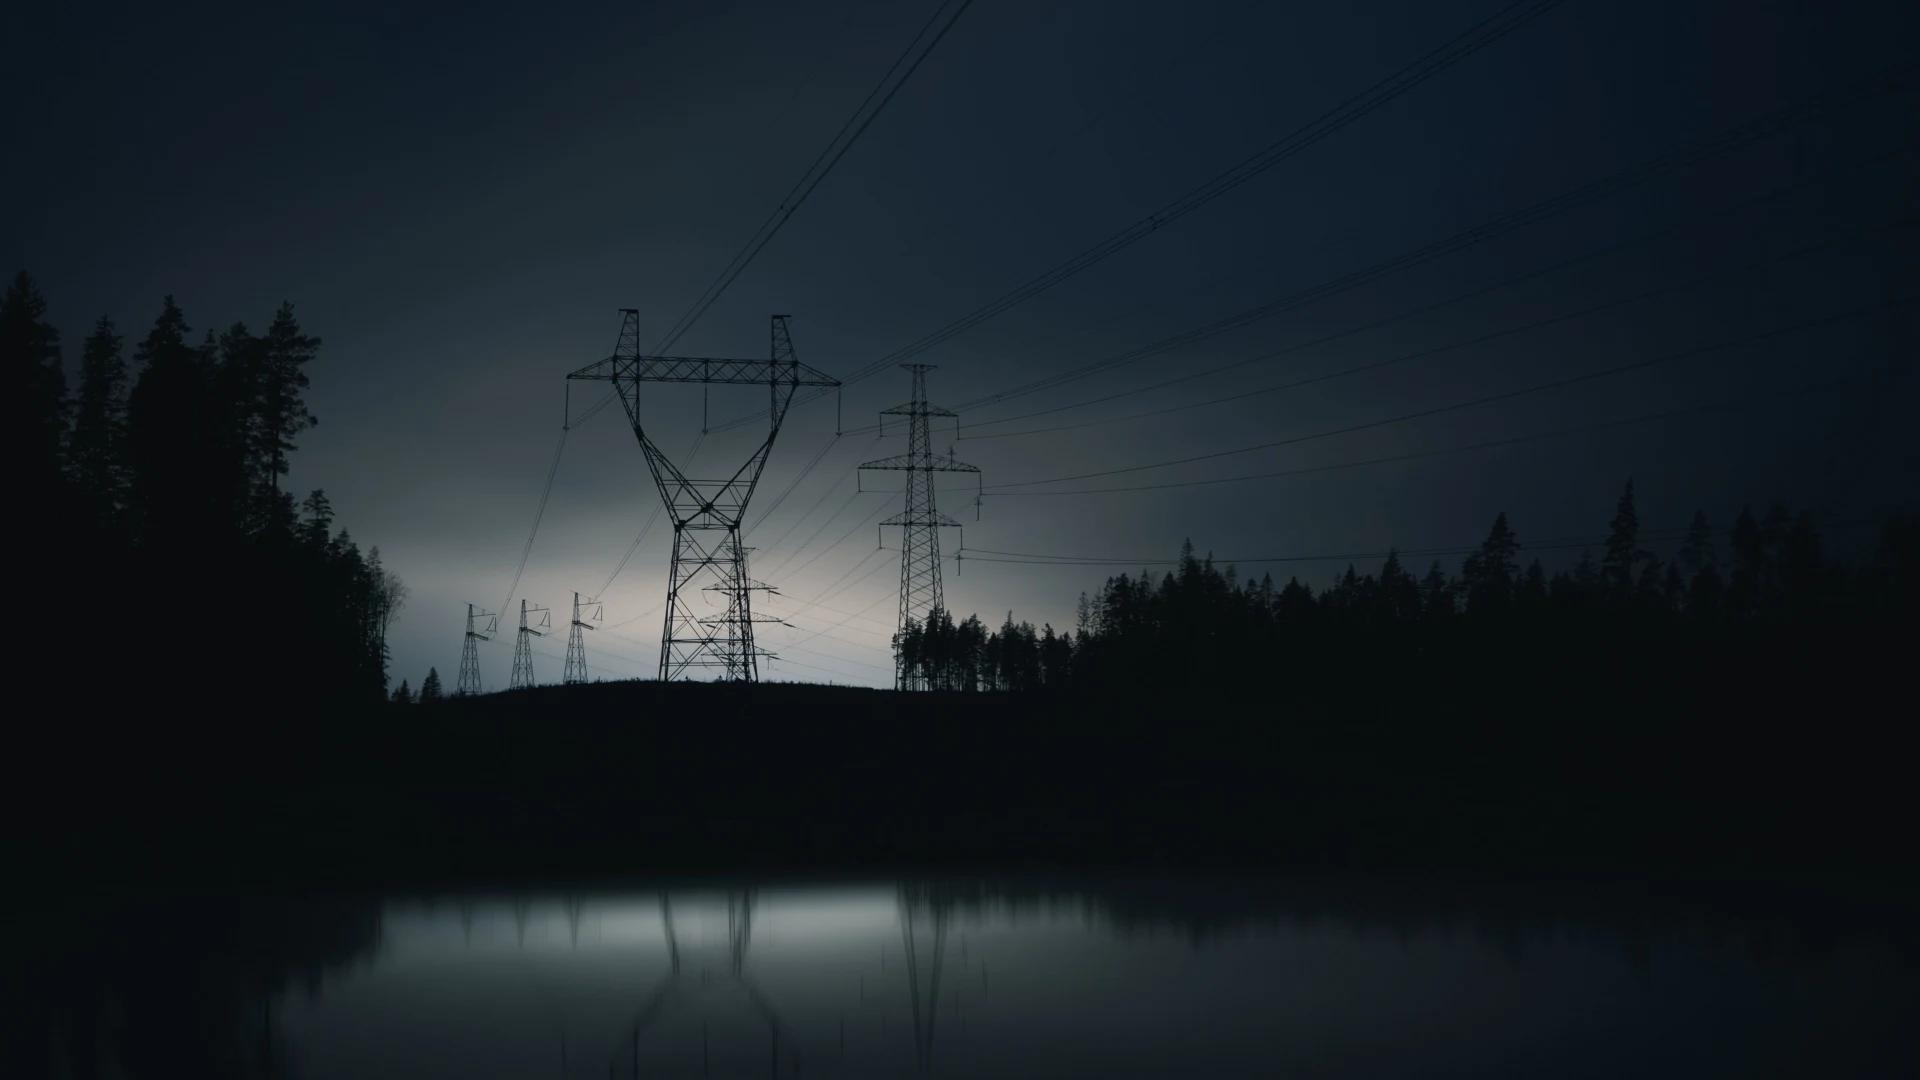 EU proposes rationing electricity to ‘flatten the curve’